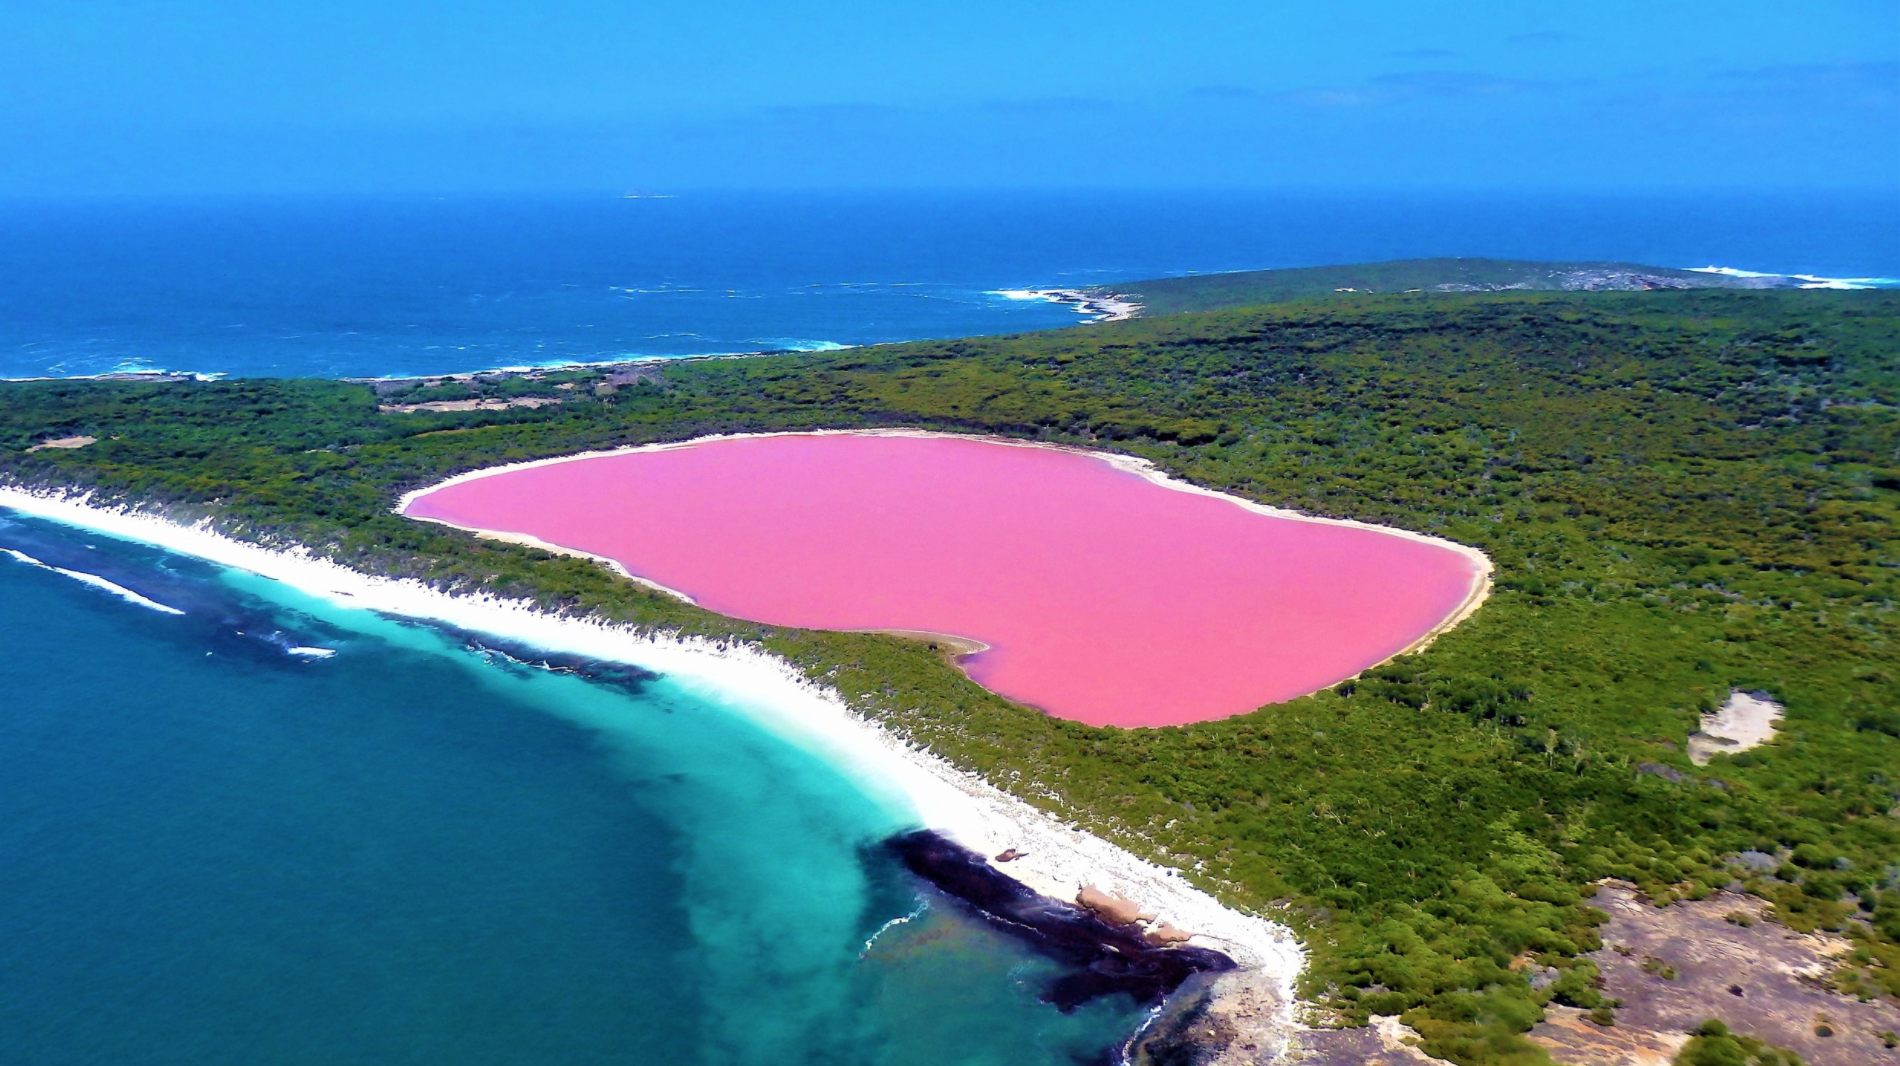 Lake Hillier-Middle Island Scenic Flight by Goldfields Air Services, Esperance, Australia